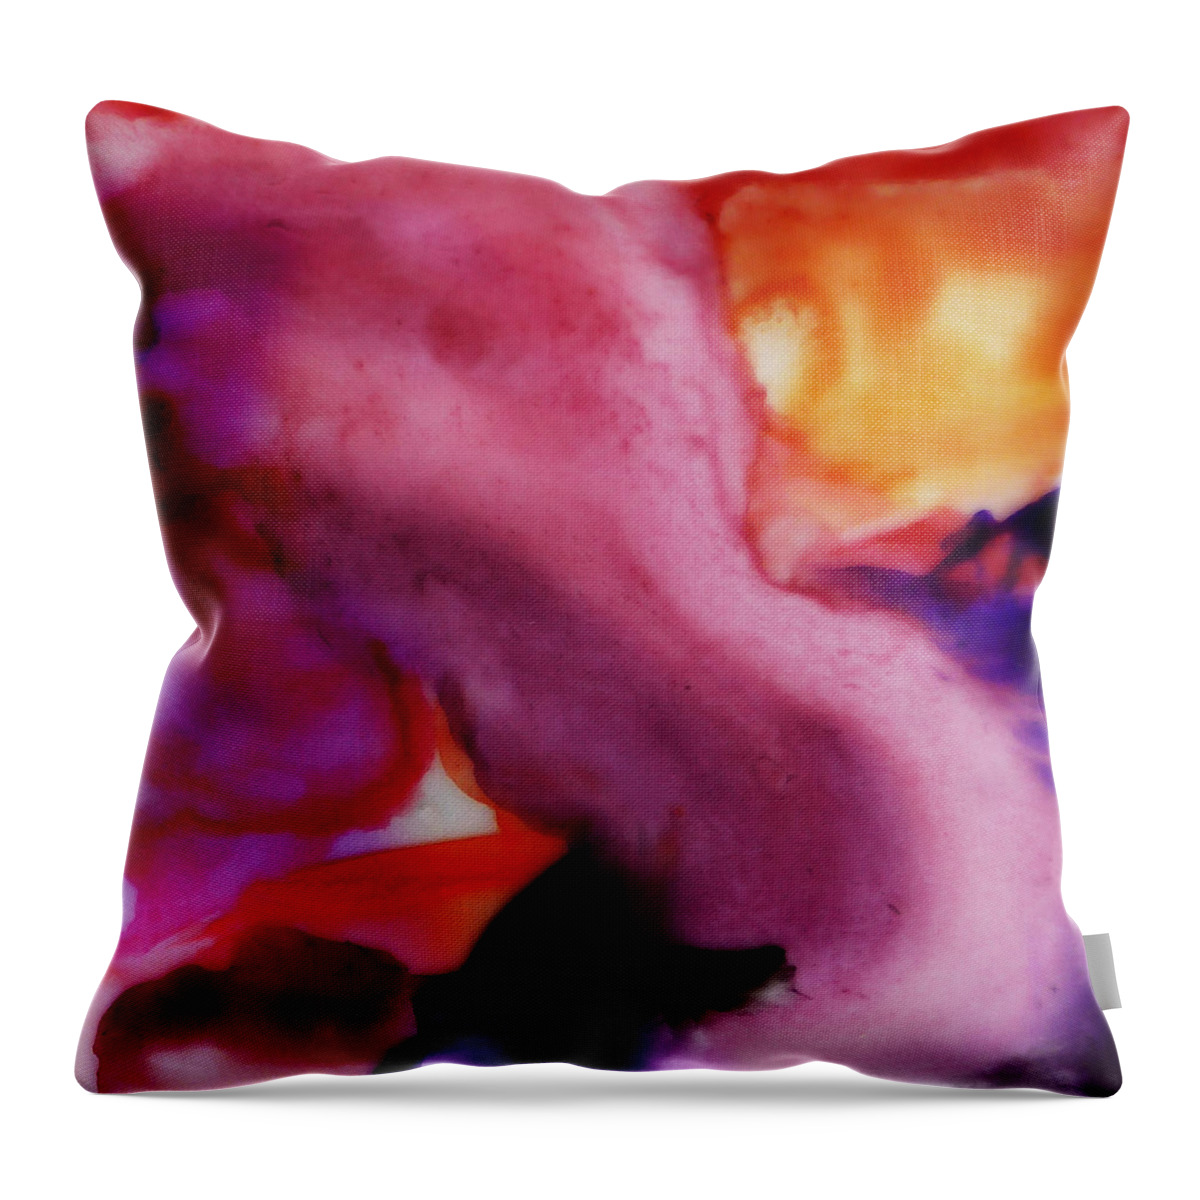 Abstract Art Throw Pillow featuring the painting Watercolor Flowing Abstract by Irina Sztukowski